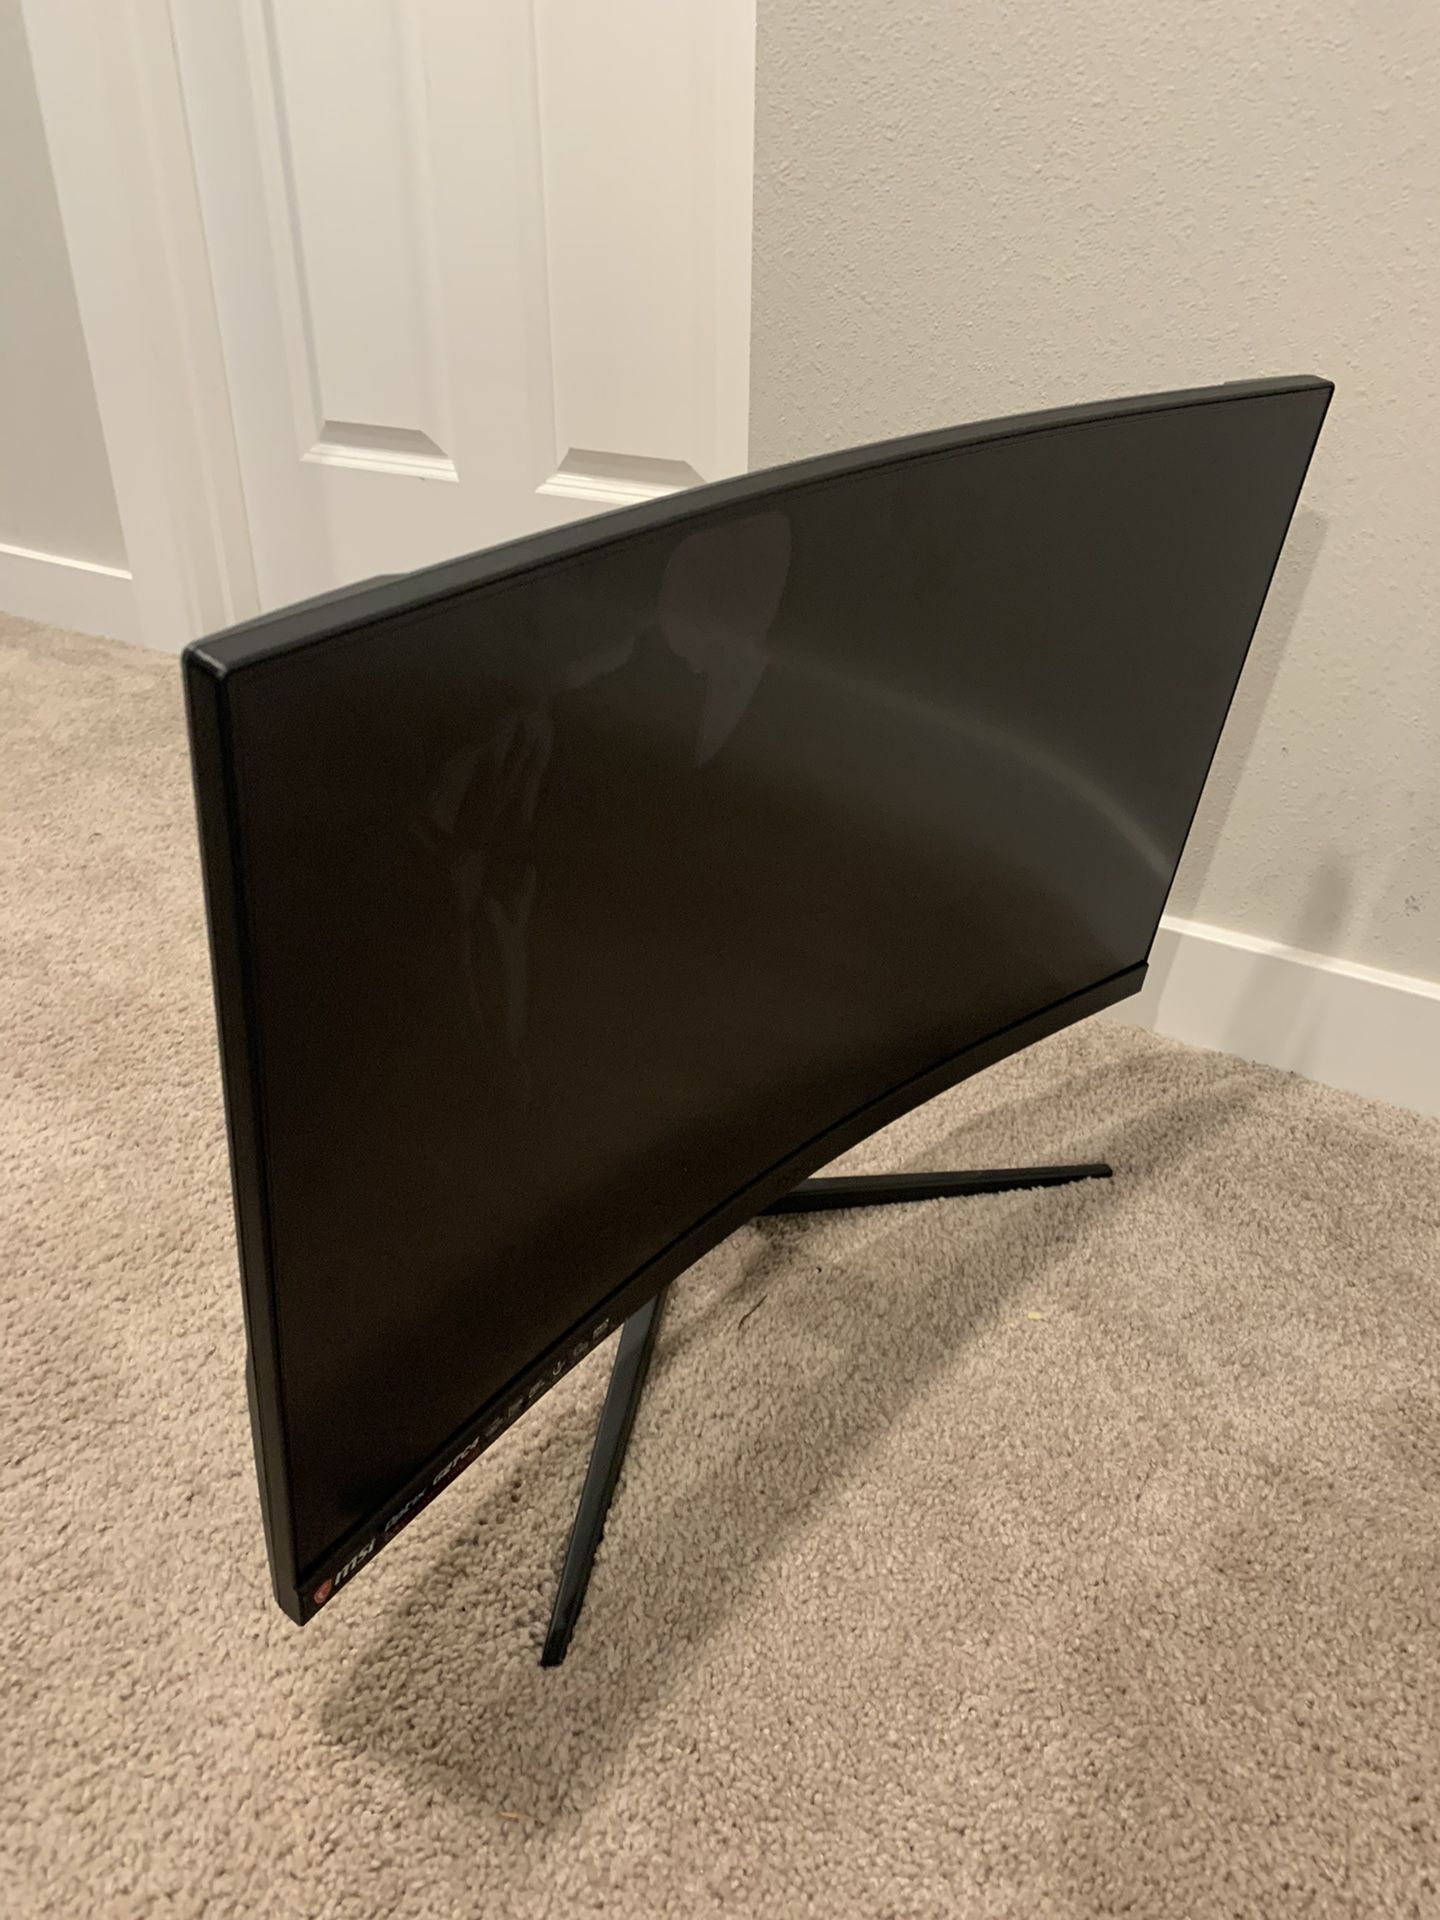 MSI Curved monitor selling for parts 27'